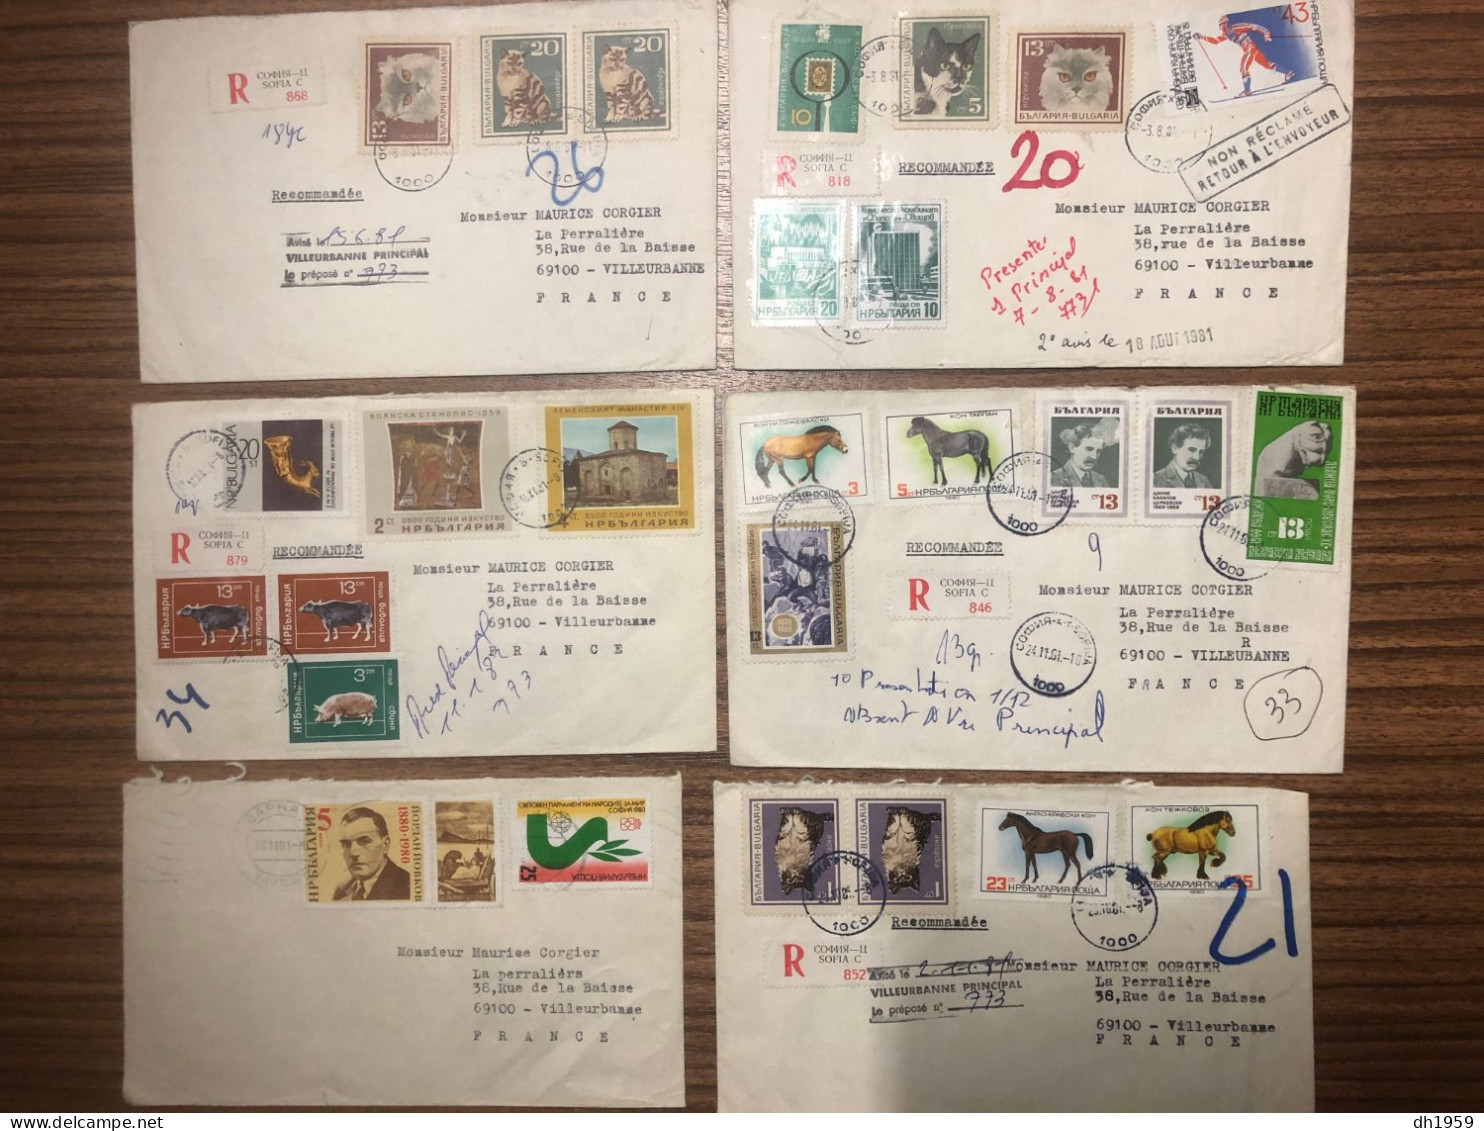 BULGARIE BULGARIEN BULGARIA COLLECTION LOT Env. 66 LETTRES COVER BRIEFE SOFIA VILLEURBANNE CAT CHAT HORSE SOCCER - Collections, Lots & Séries